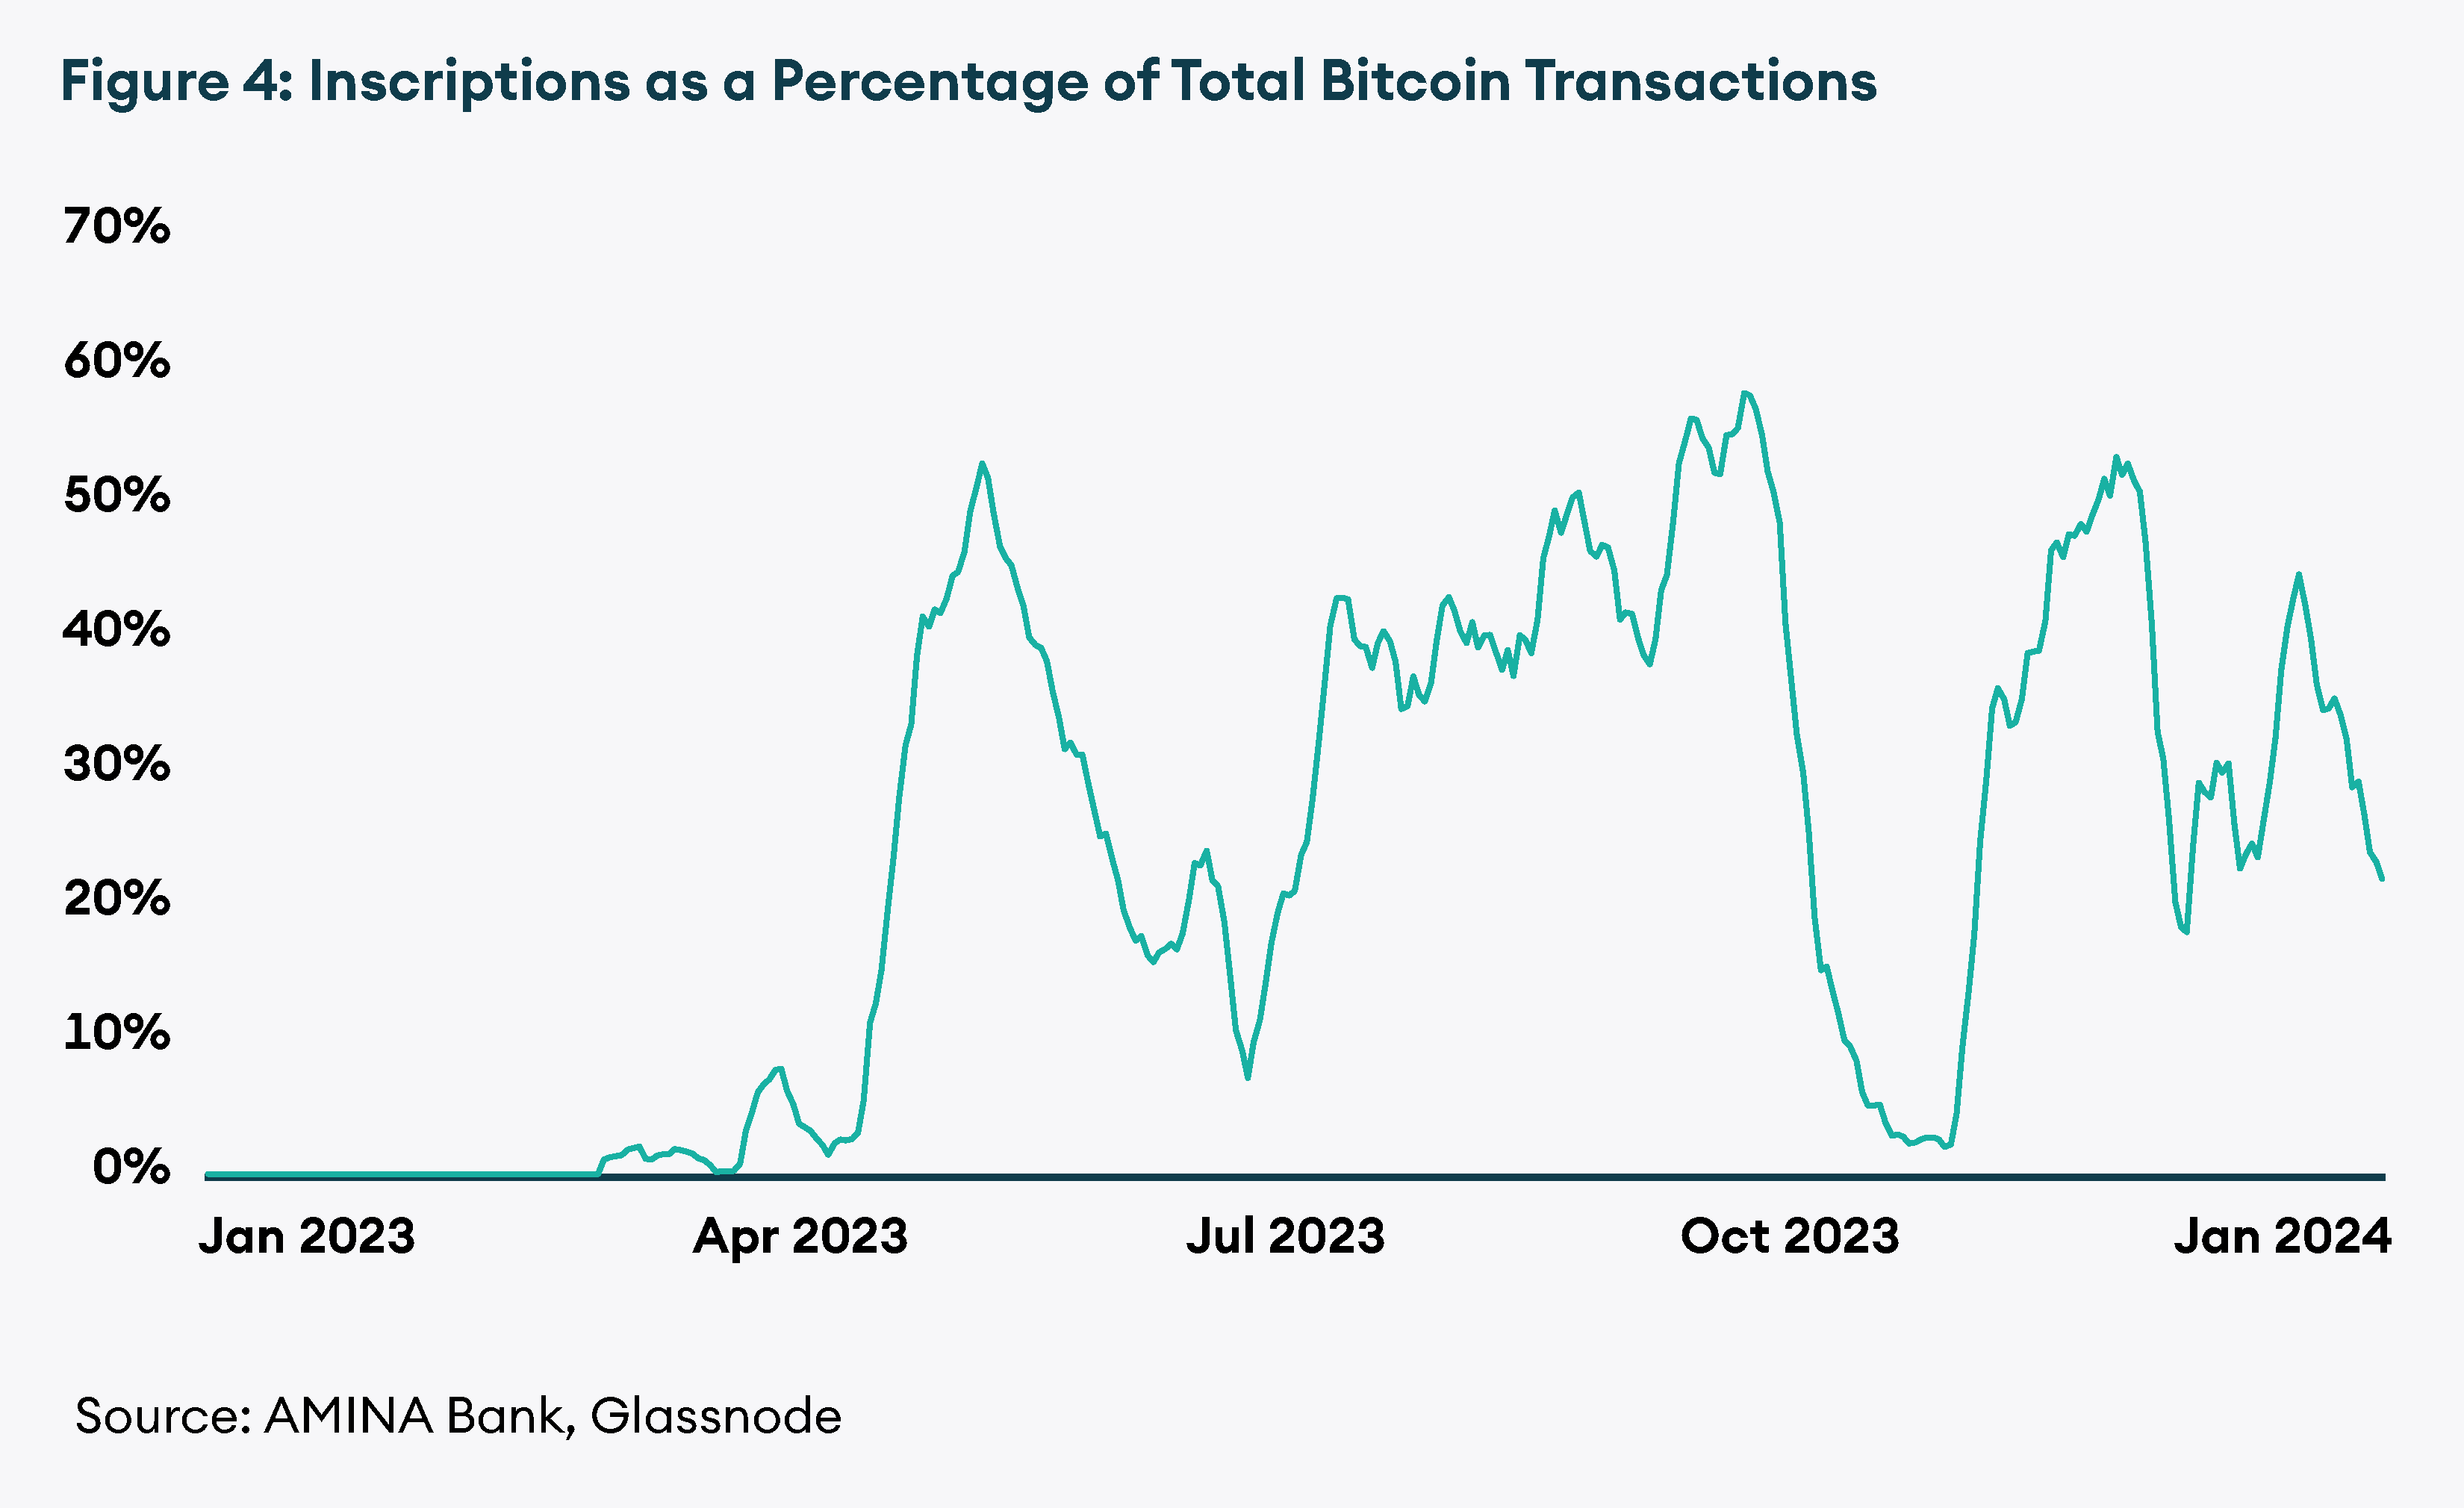 Inscriptions as a Percentage of Total Bitcoin Transactions